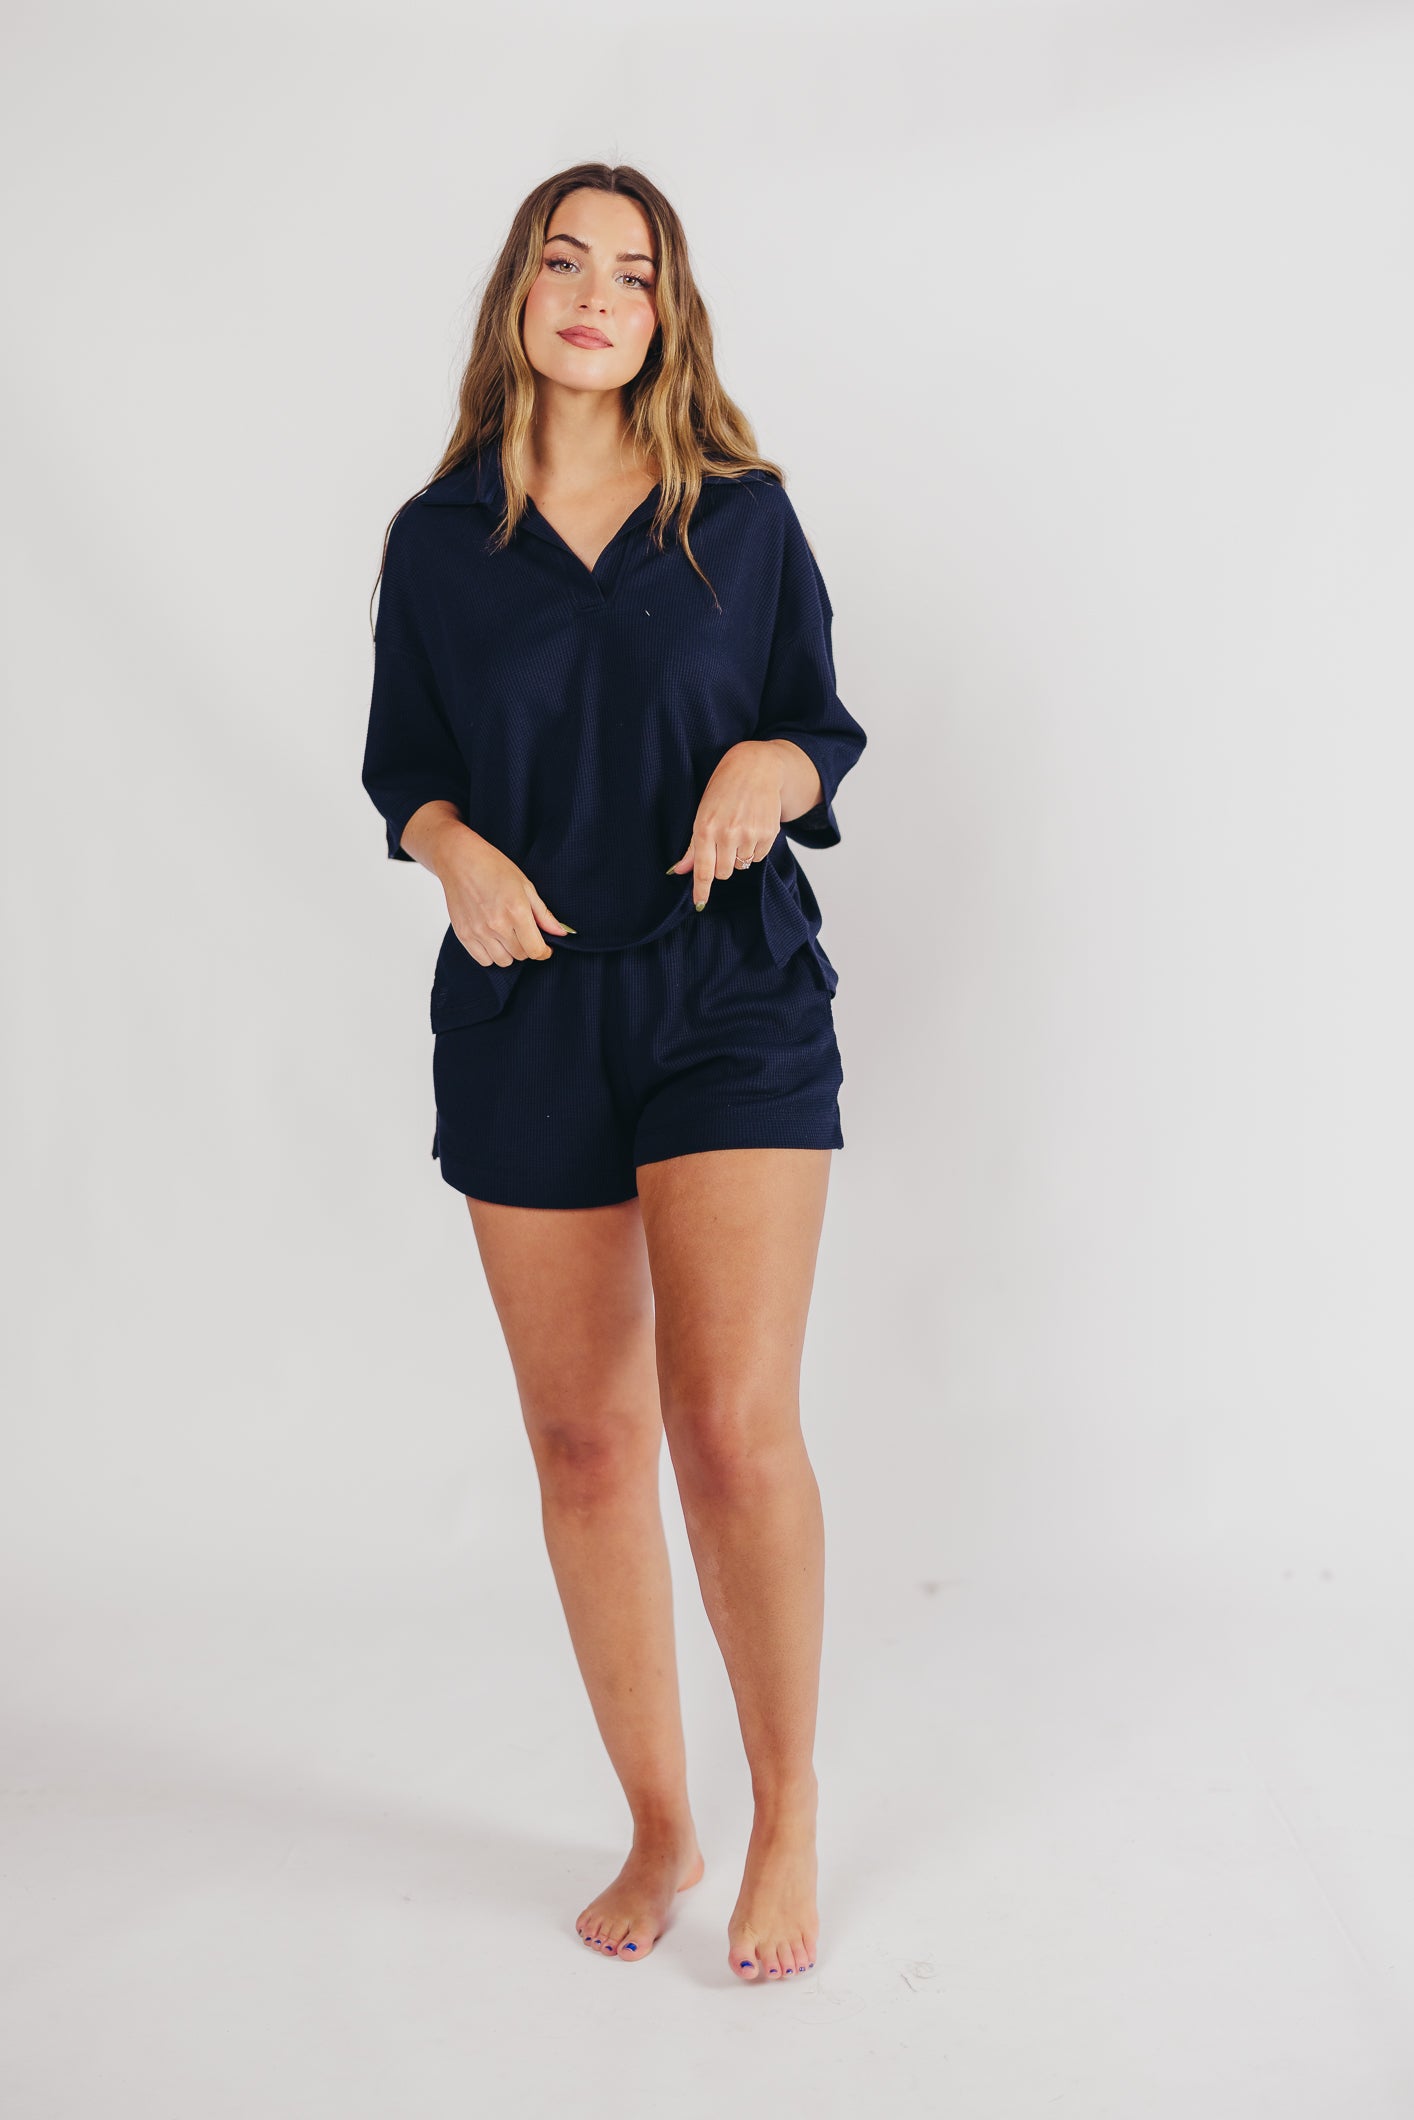 Leanna Knit Top in Navy (bottoms sold separately)